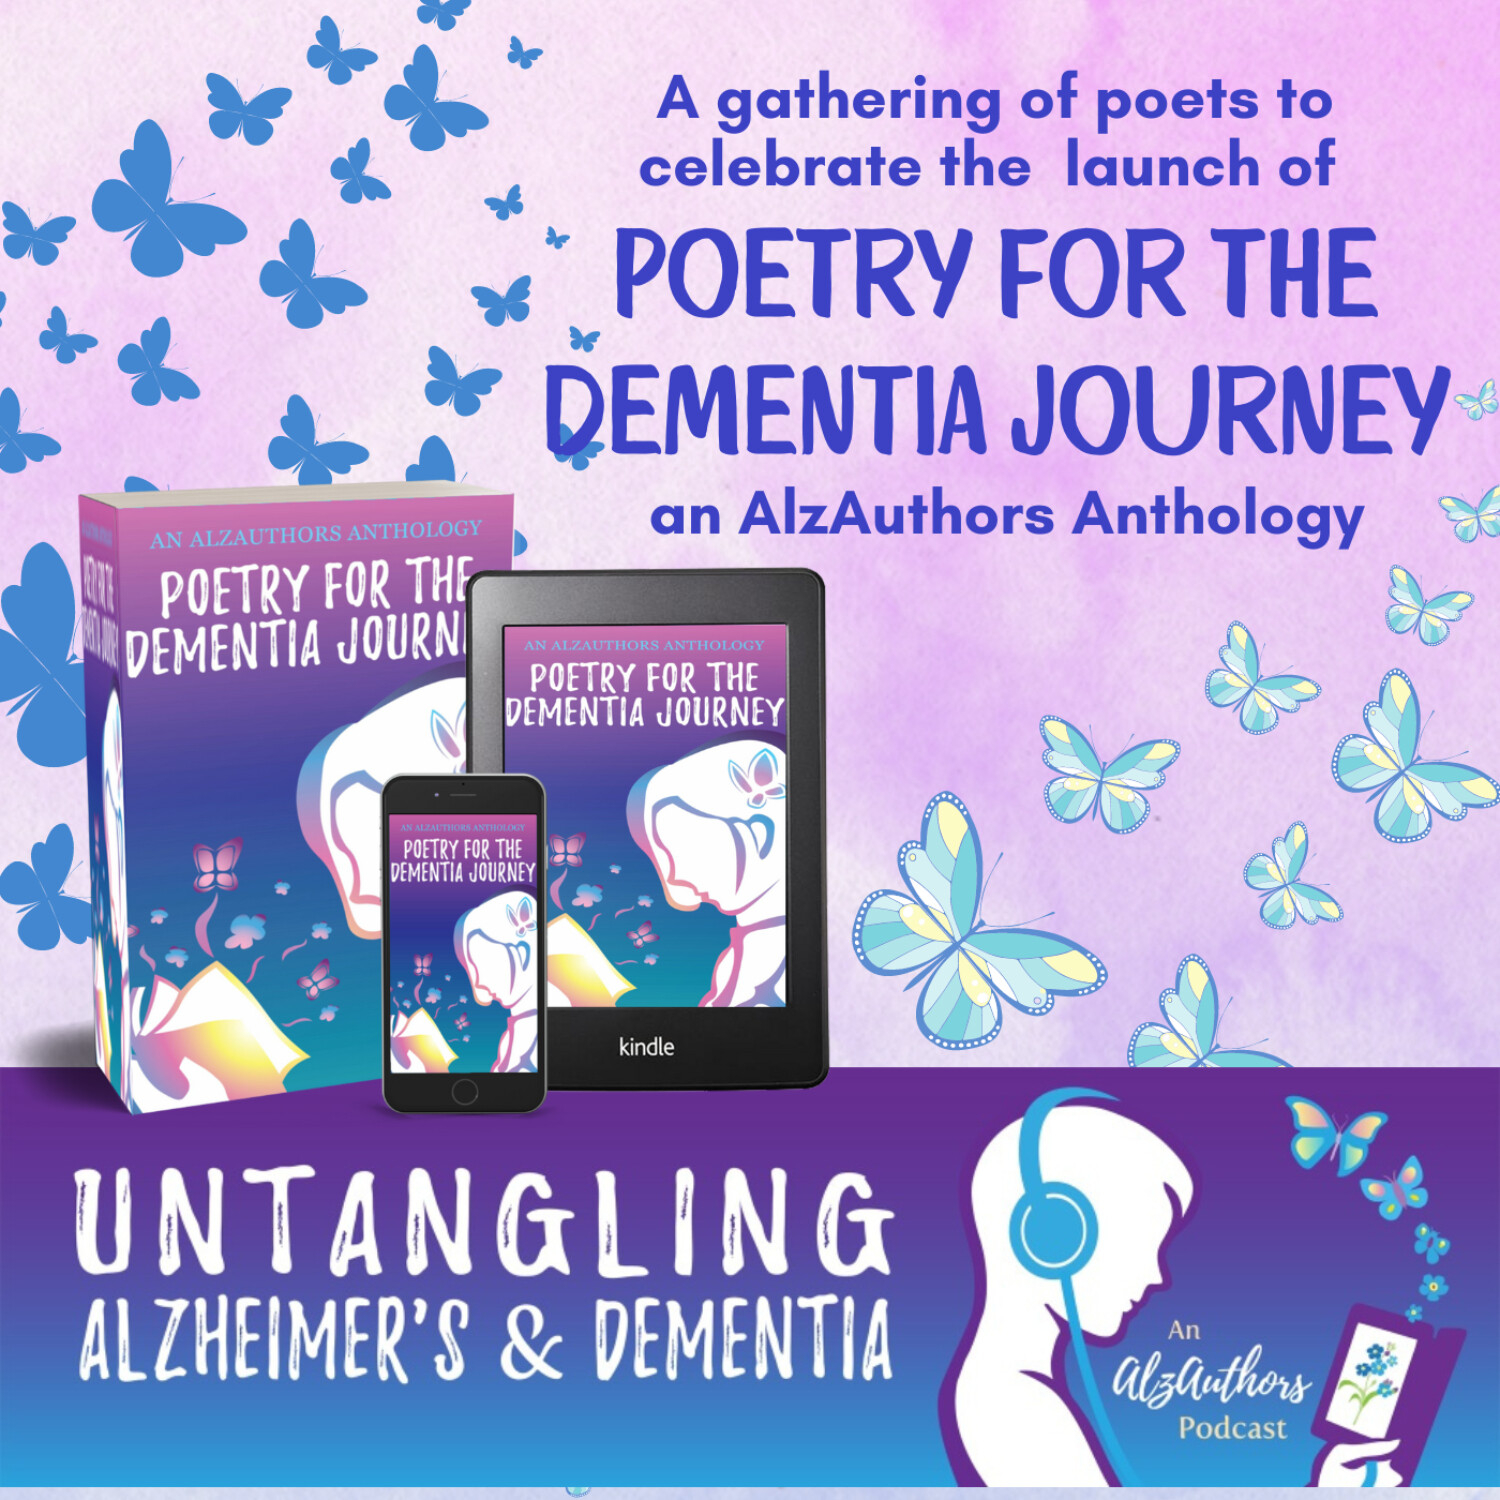 Launching “Poetry for the Dementia Journey”: An AlzAuthors Anthology